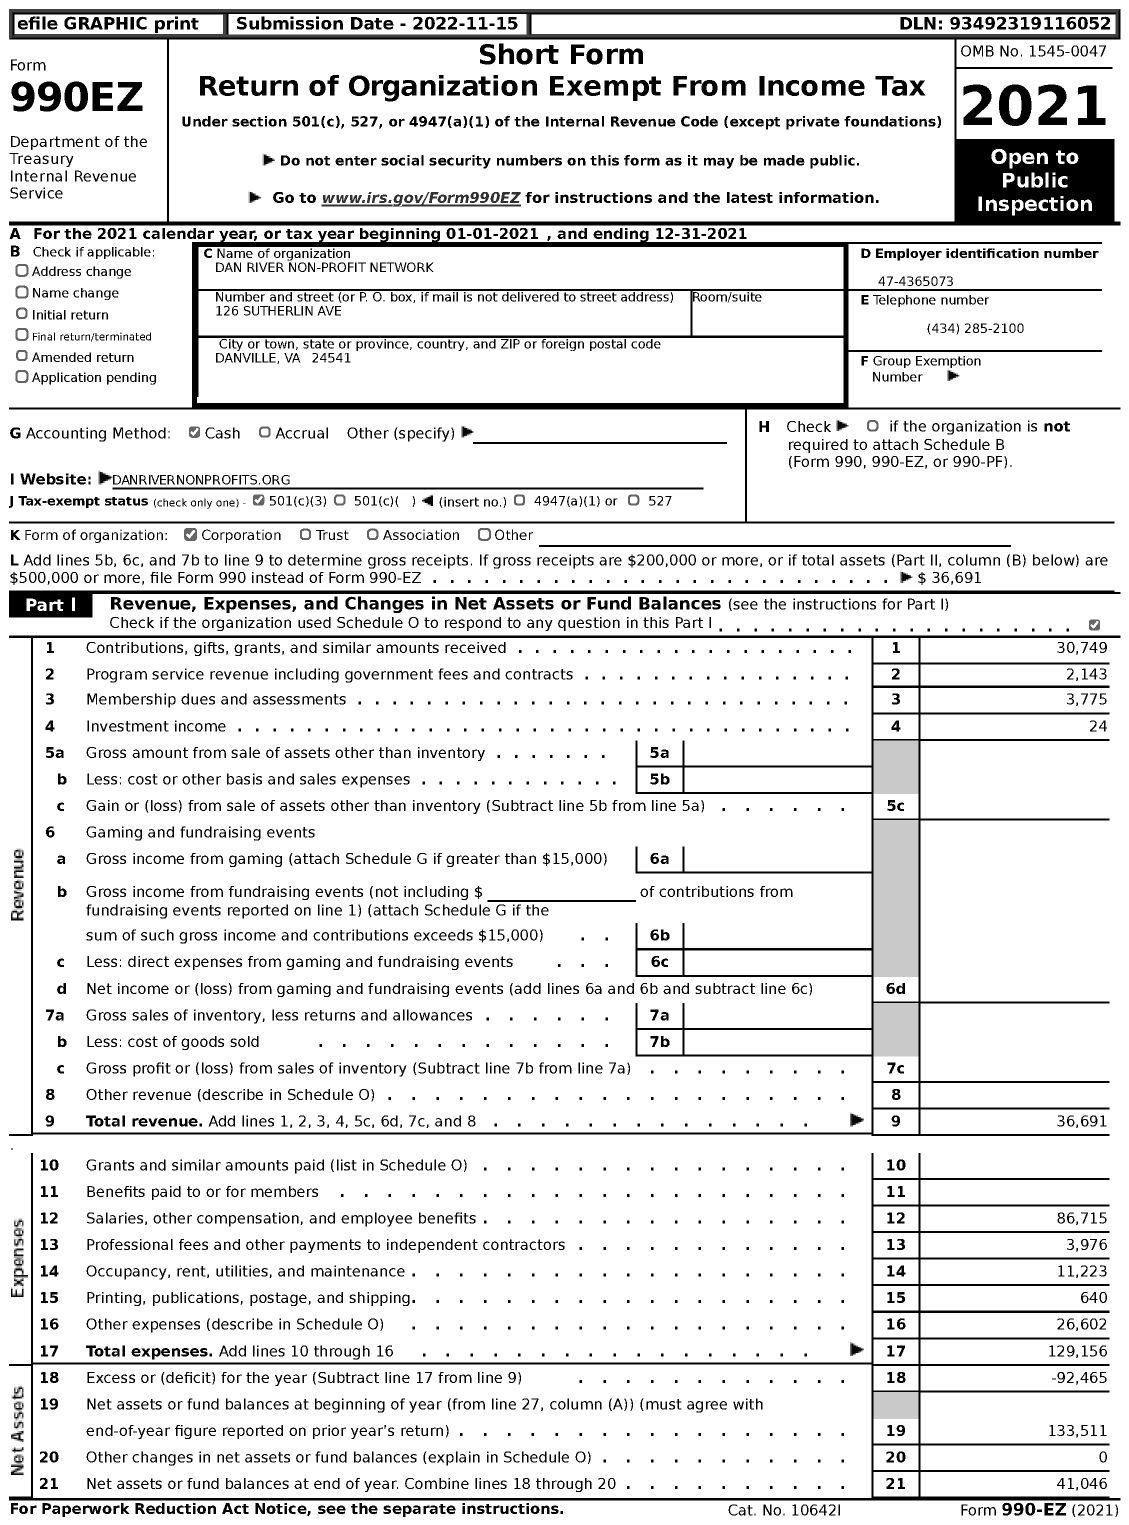 Image of first page of 2021 Form 990EZ for Dan River Non-Profit Network